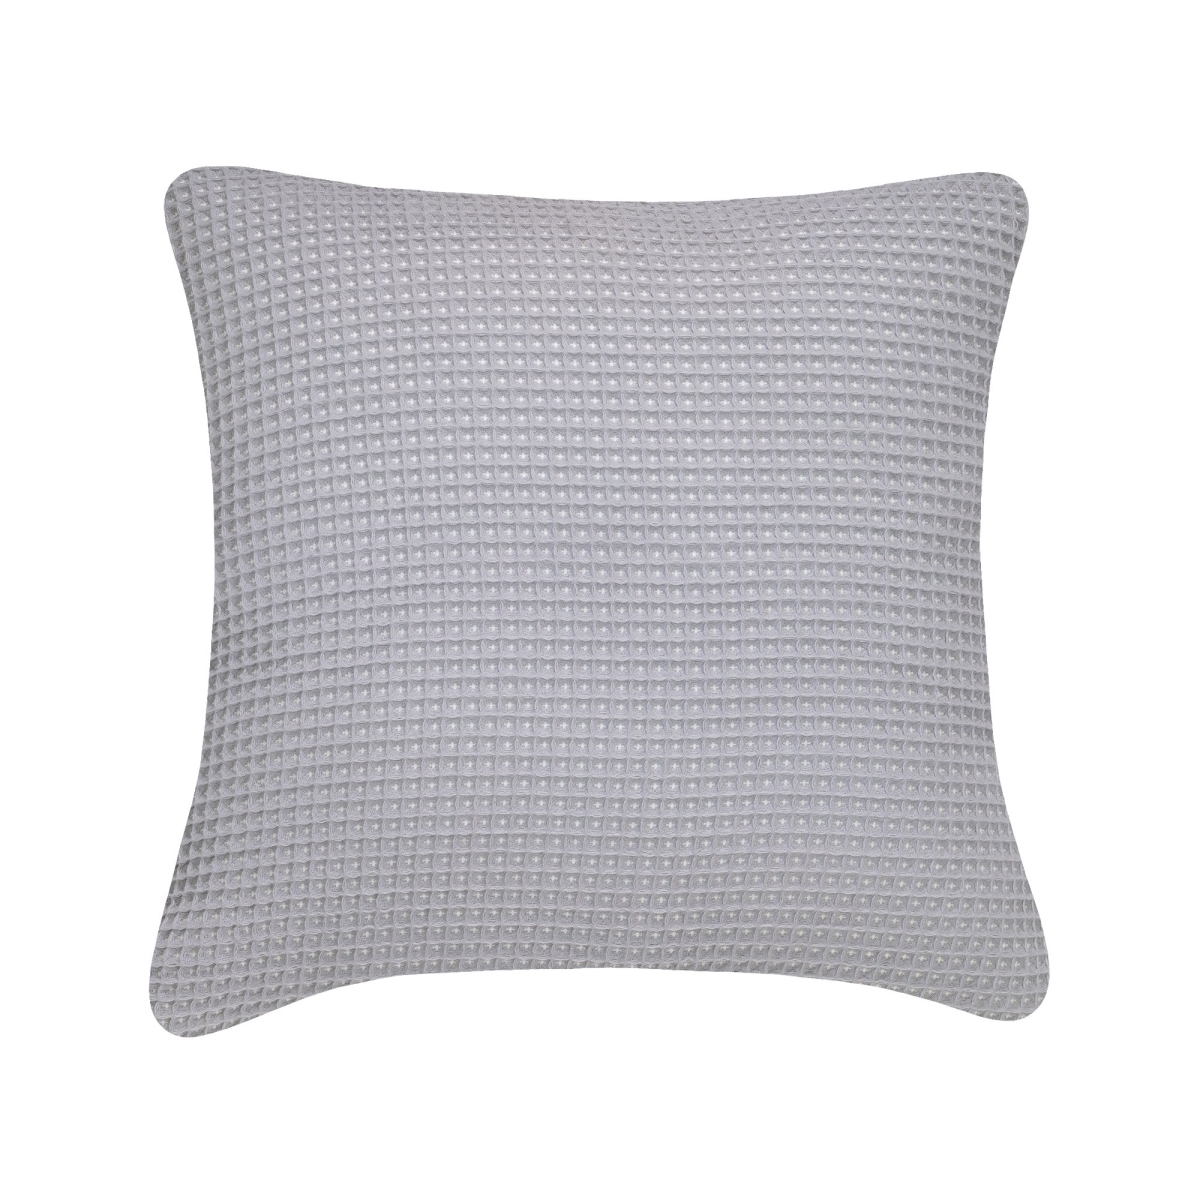 20 X 20 In. Waffle Cushion Cover - White & Grey